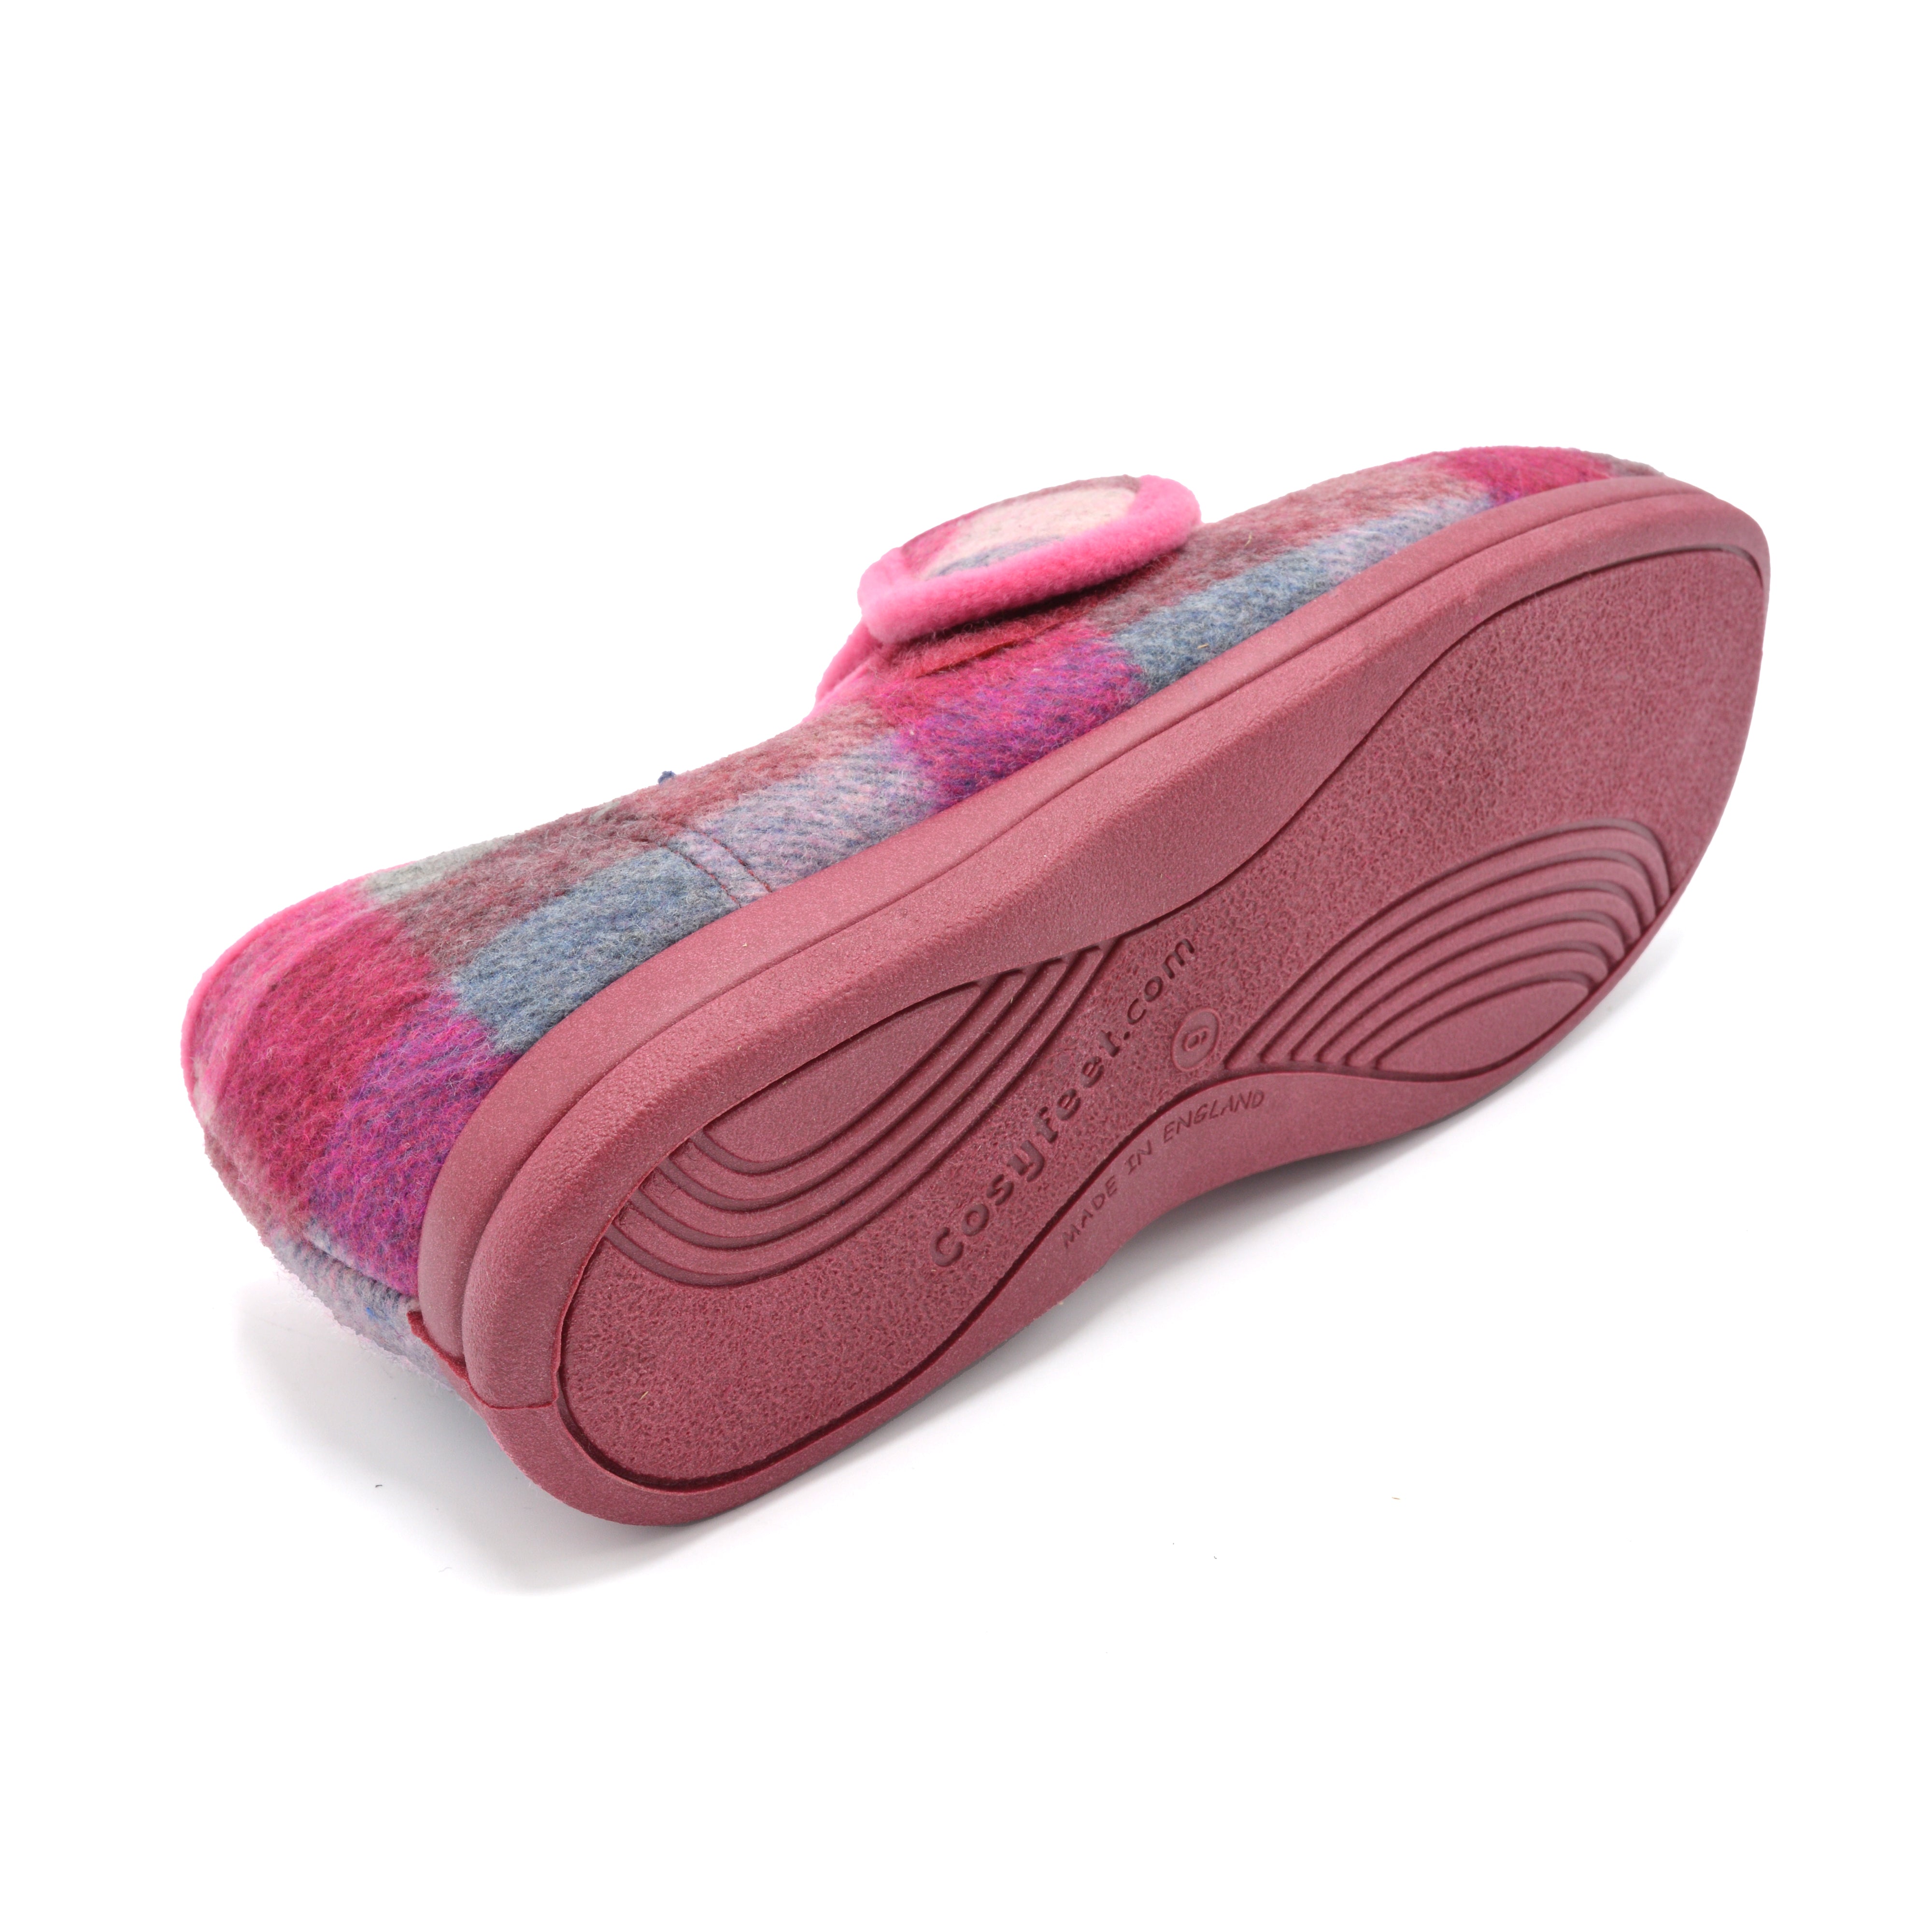 Womens Pink Extra Wide Velcro Slippers For Swollon Feet